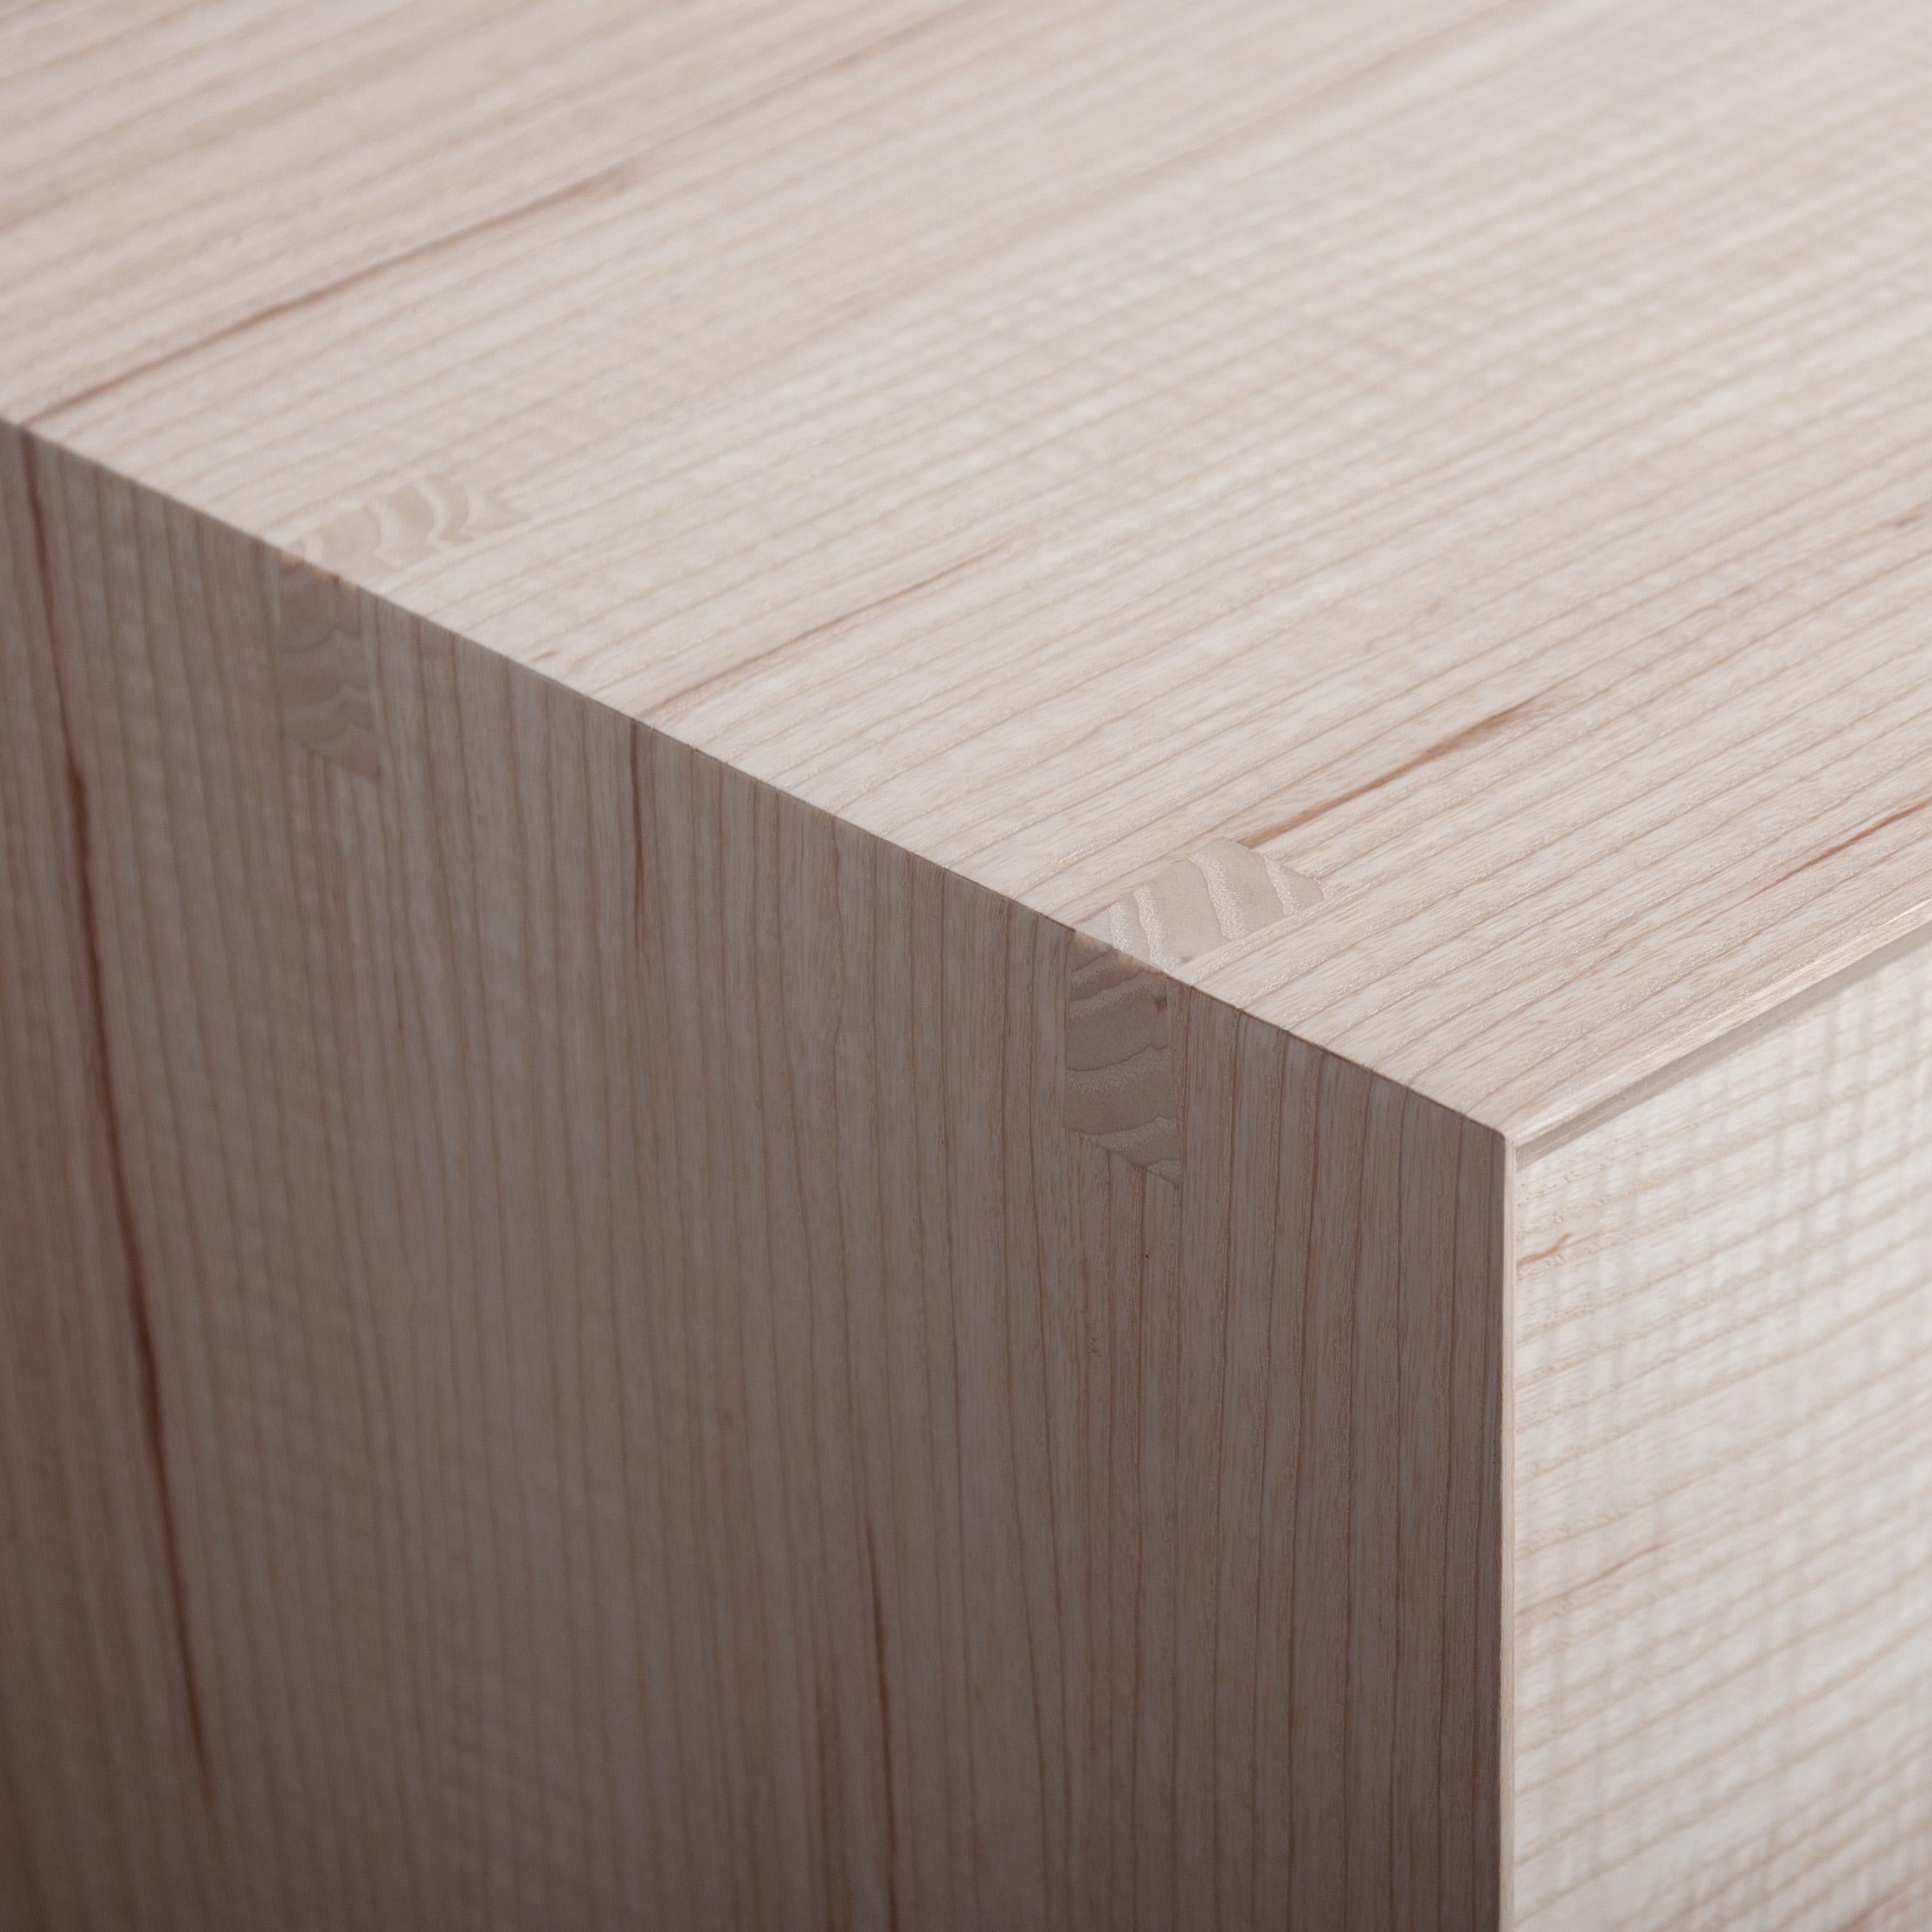 Paar Handcrafted English Ash End Tables / Drawers. (Englisch) im Angebot